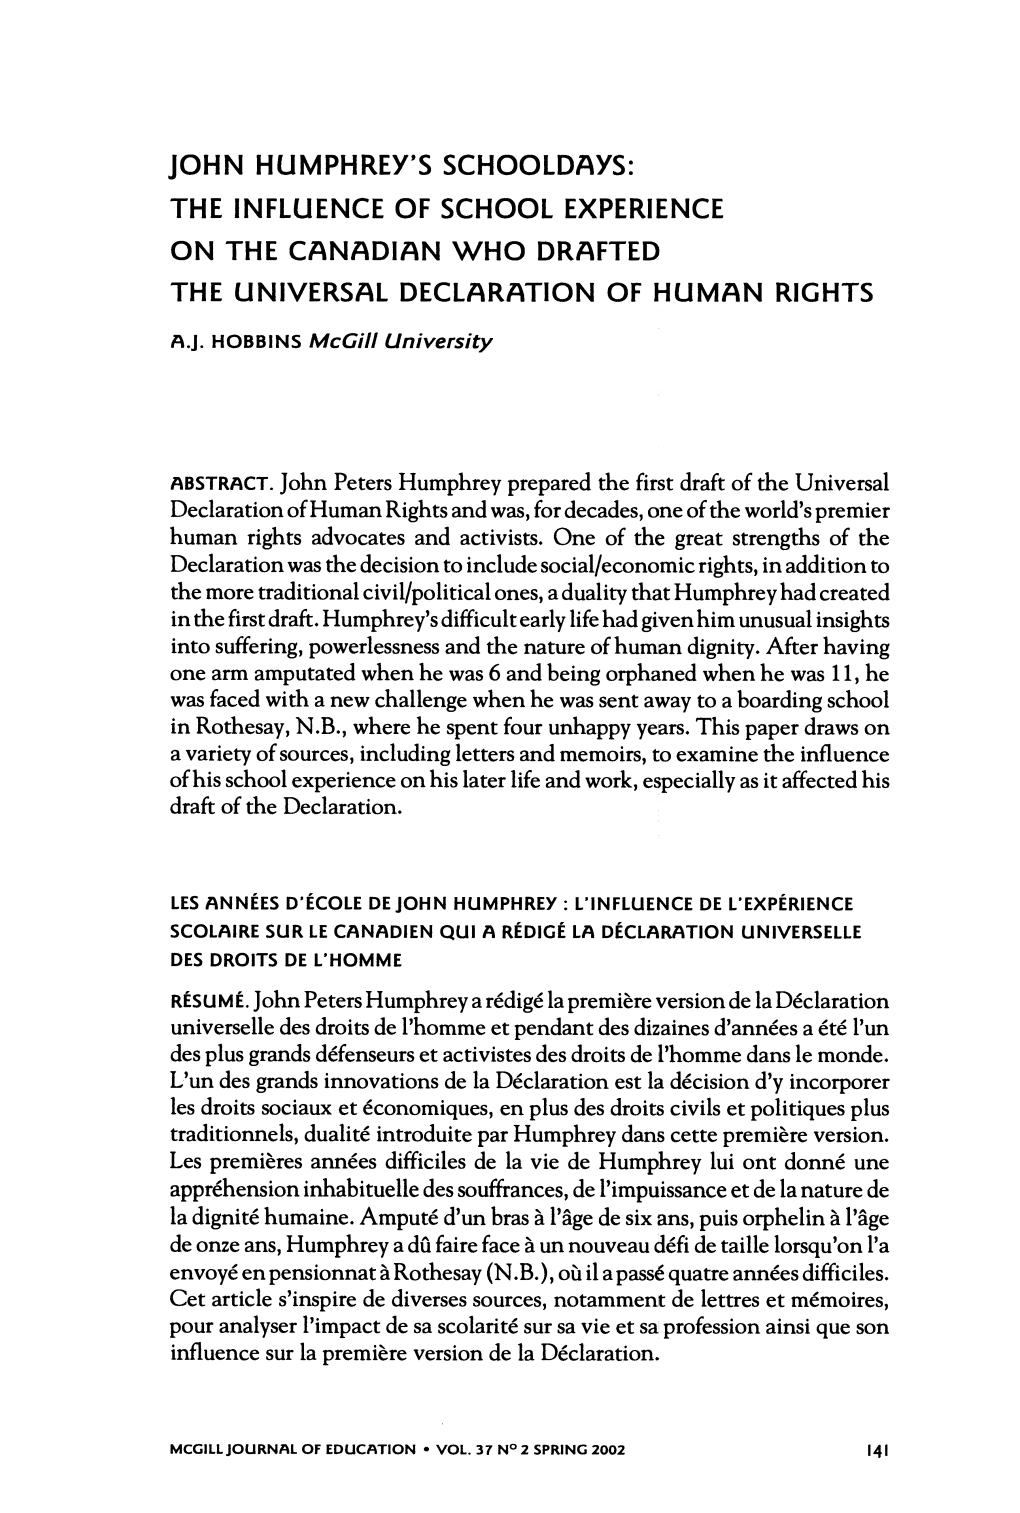 John Humphrey's Schooldays: the Influence of School Experience on the Canadian Who Drafted the Universal Declaration of Human Rights